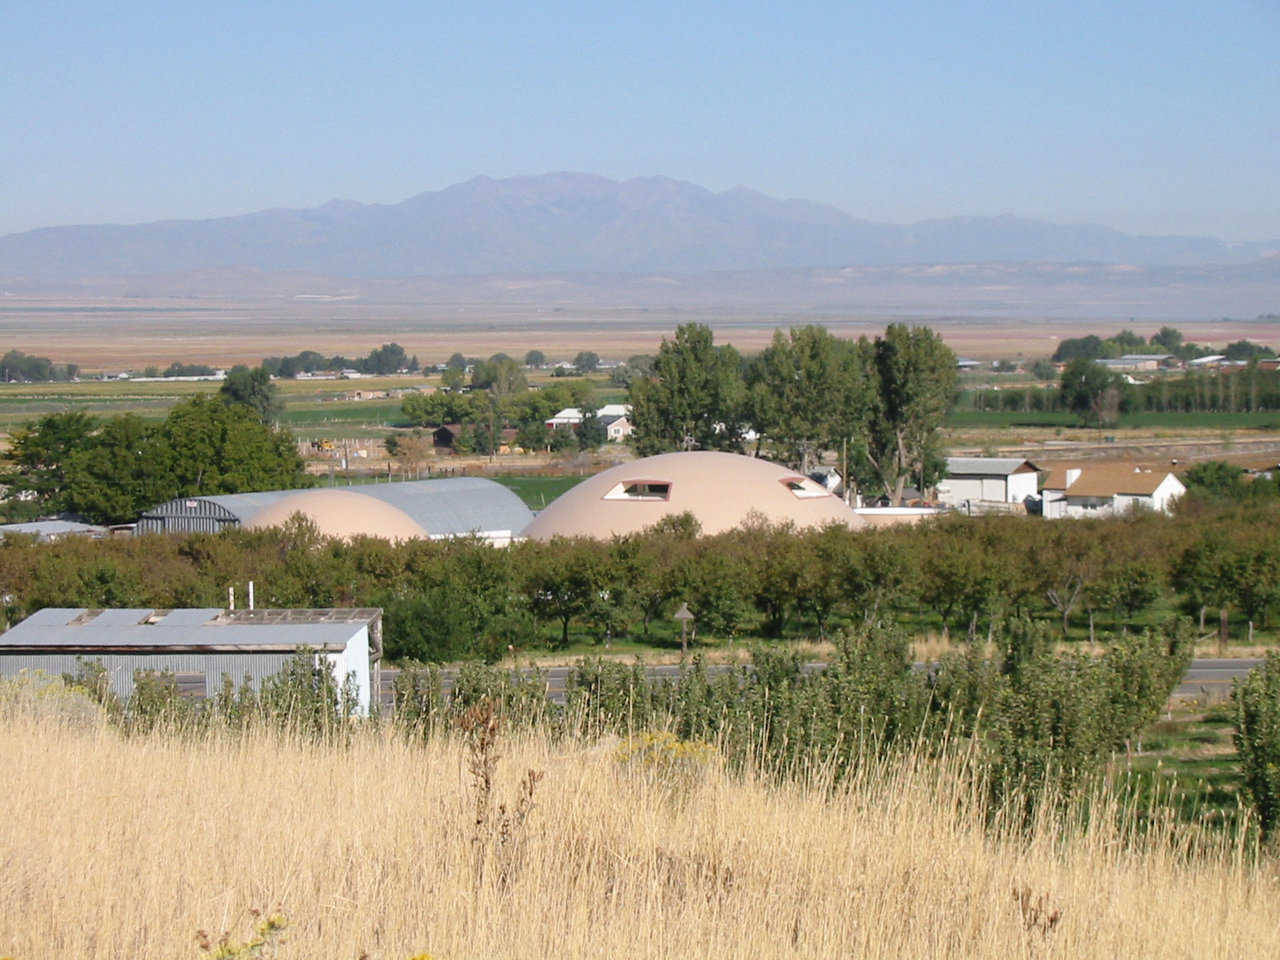 Centro De La Familia de Utah — These four Monolithic Domes in Genola, Utah were designed and built as a facility for Utah’s migrant workers. It includes a Head Start school for children and various educational programs for adults.